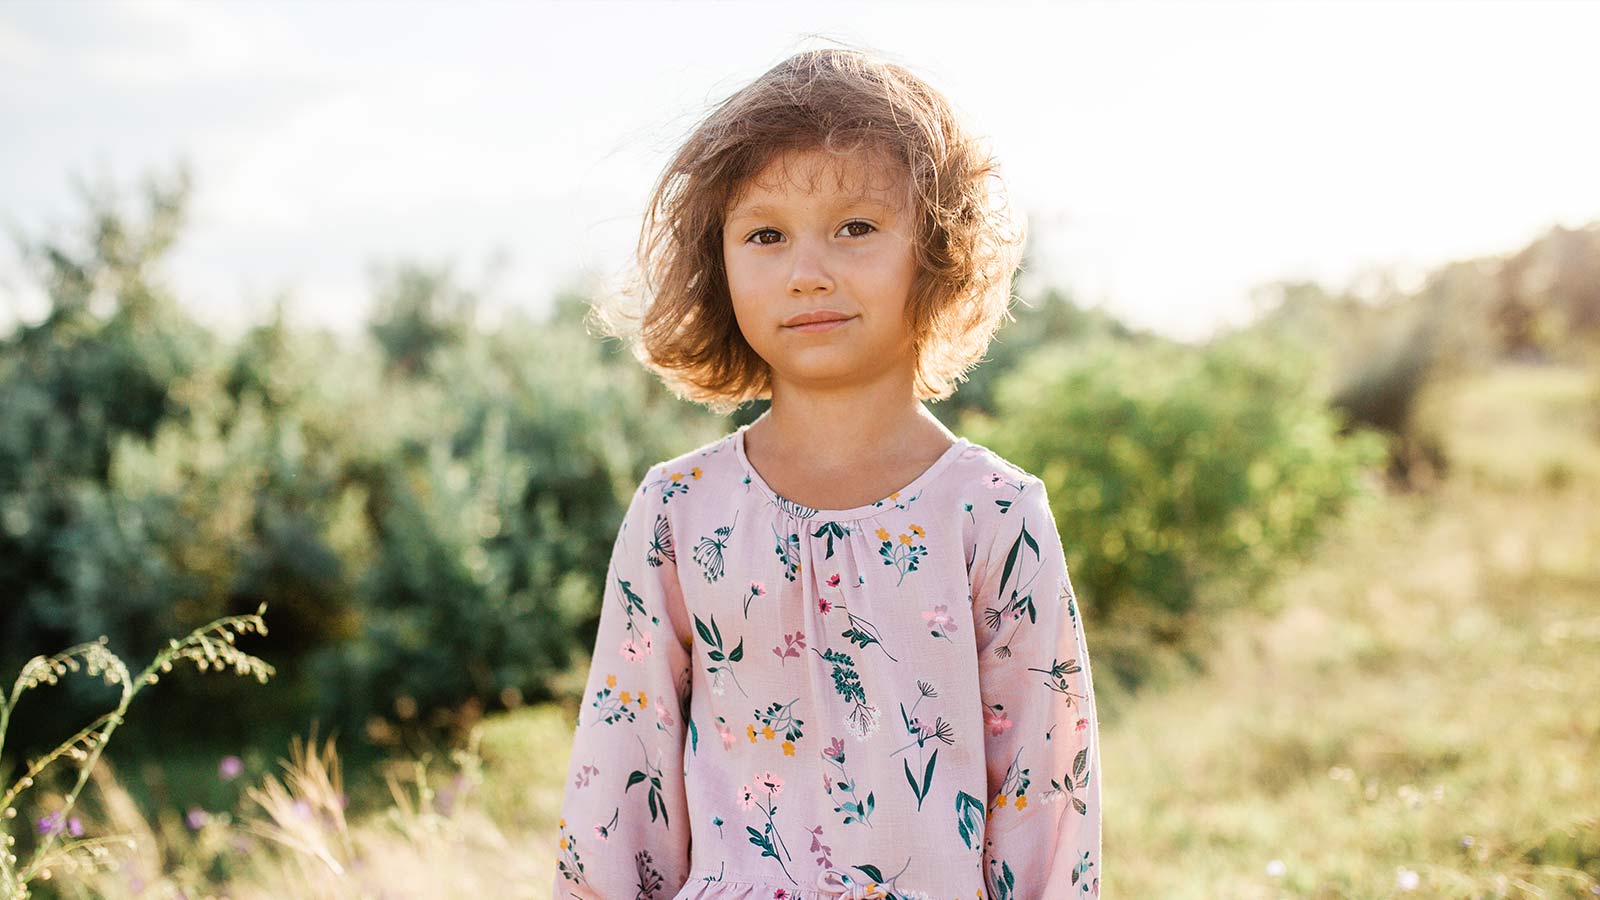 Portrait photo of girl standing in a field